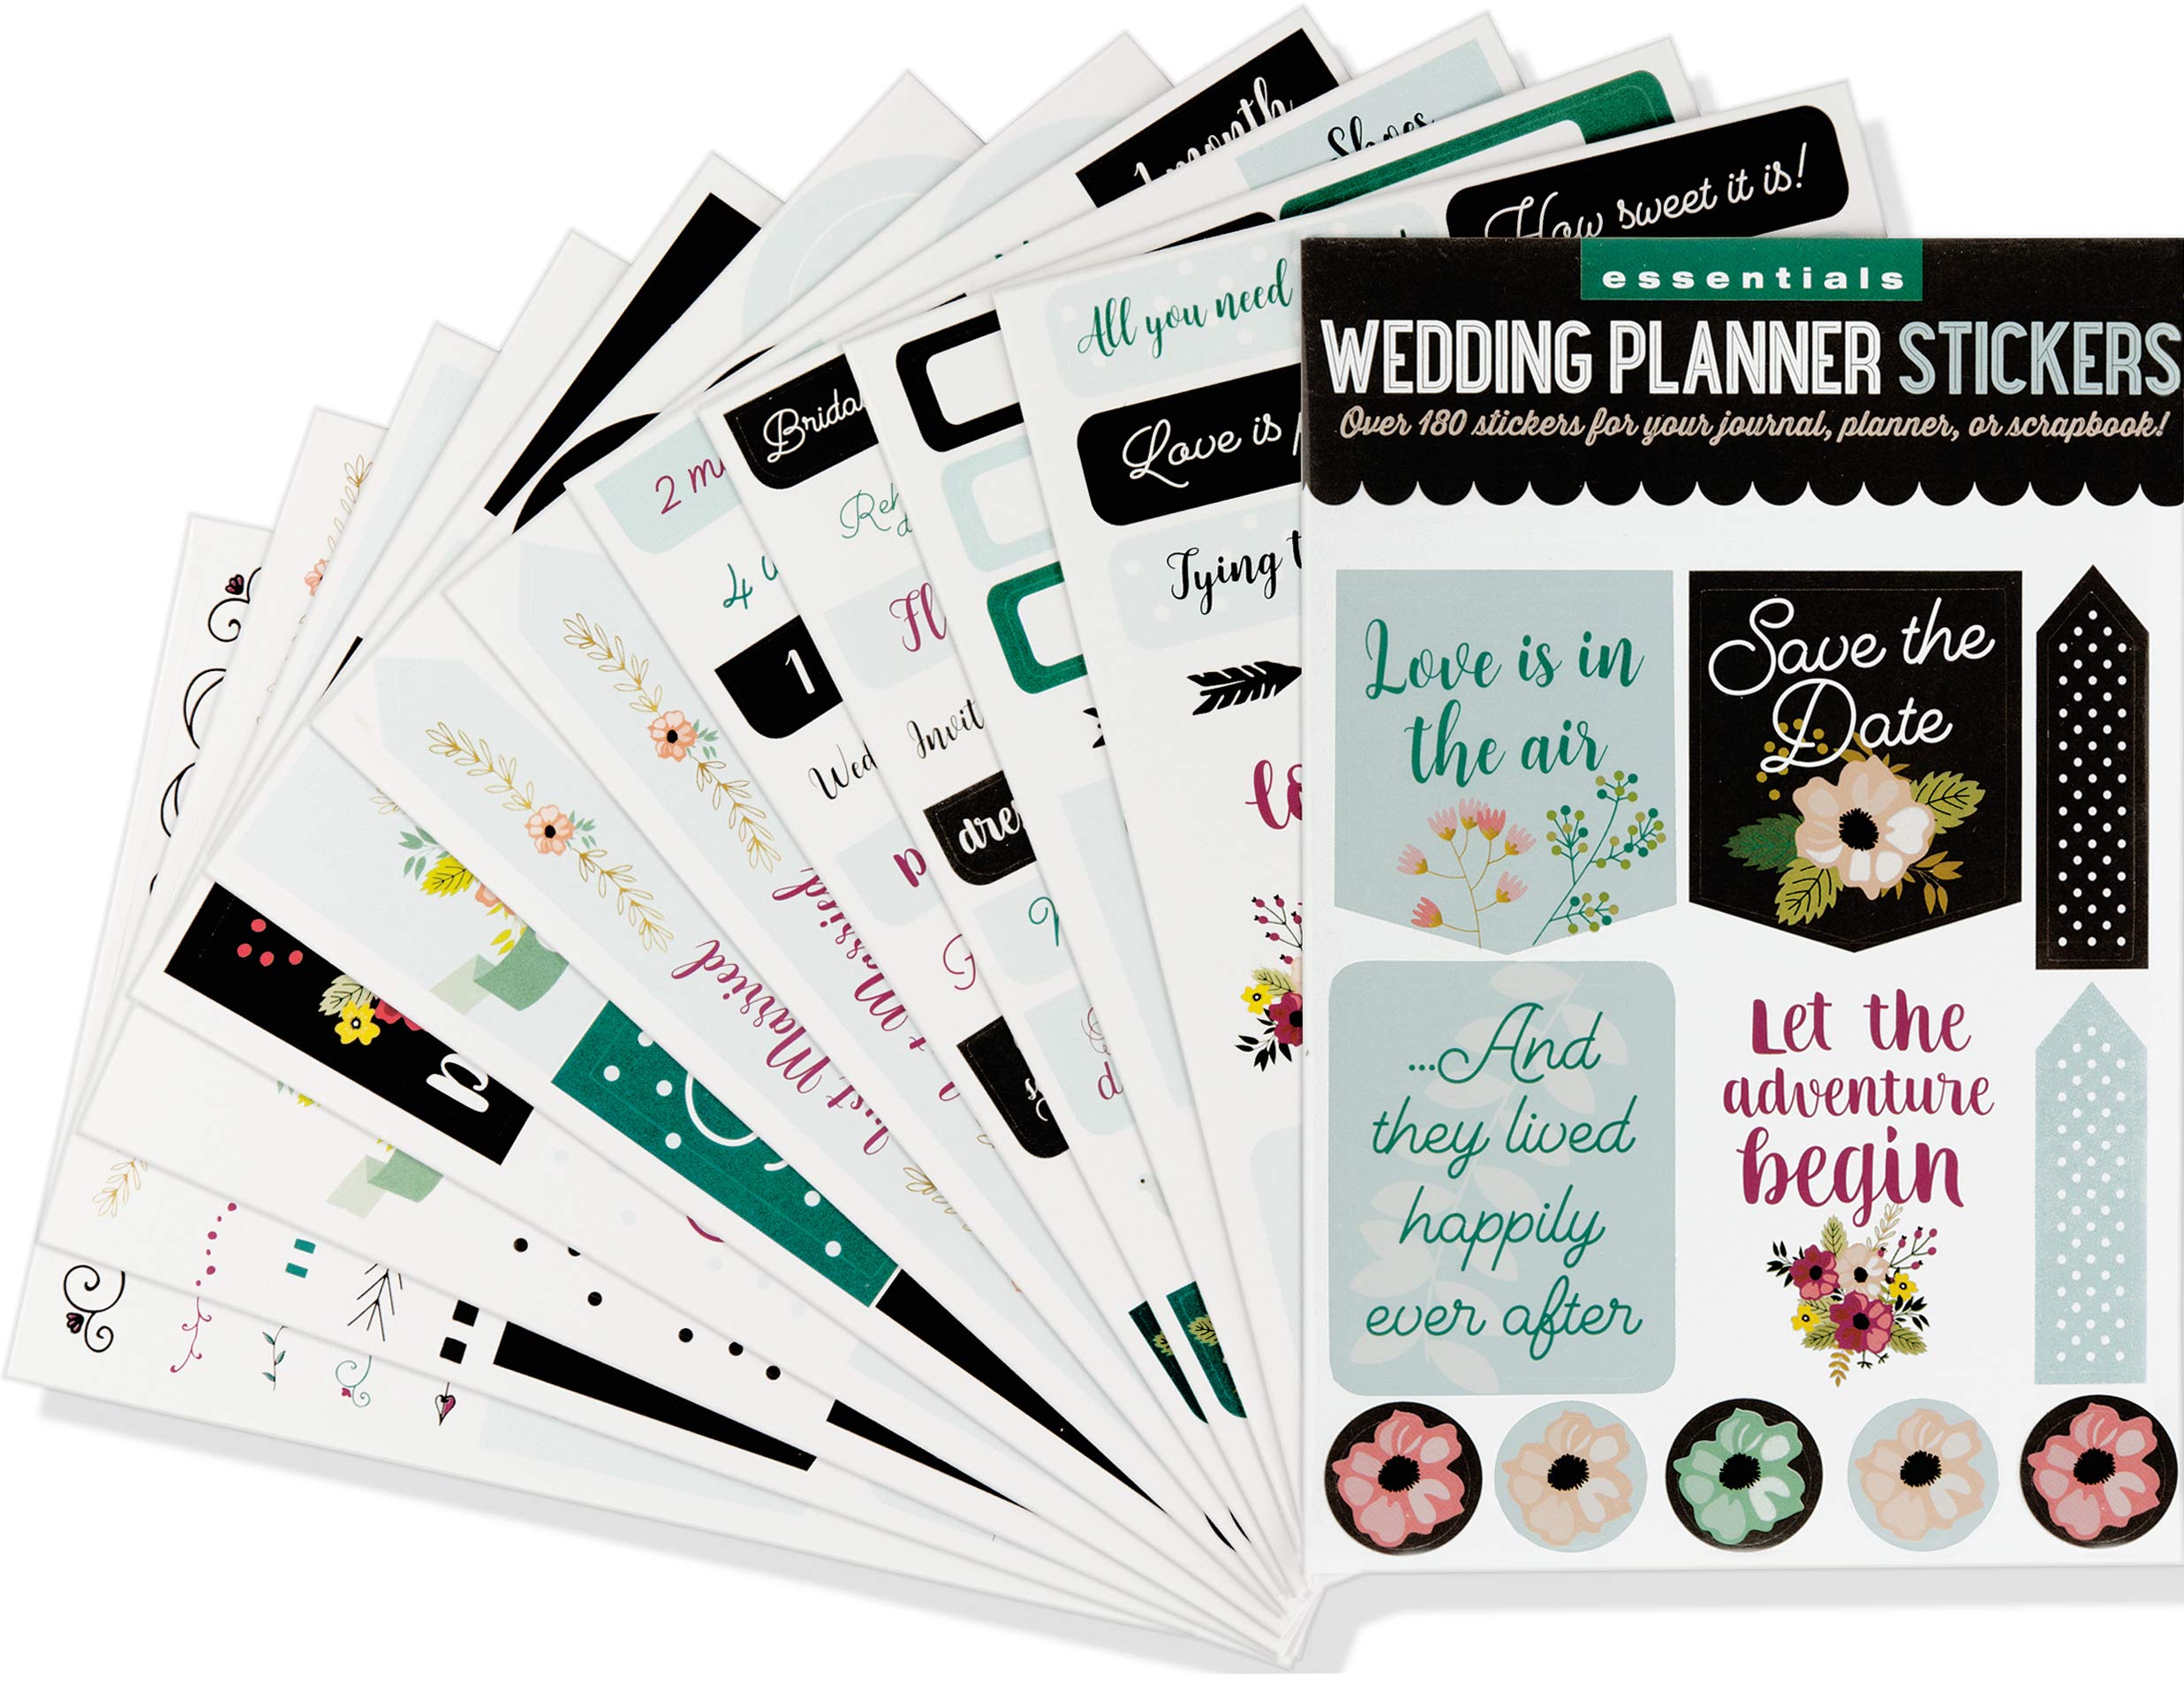 Essentials Wedding Planner Stickers (set of 180 stickers) by Inc. Peter Pauper Press on Amazon